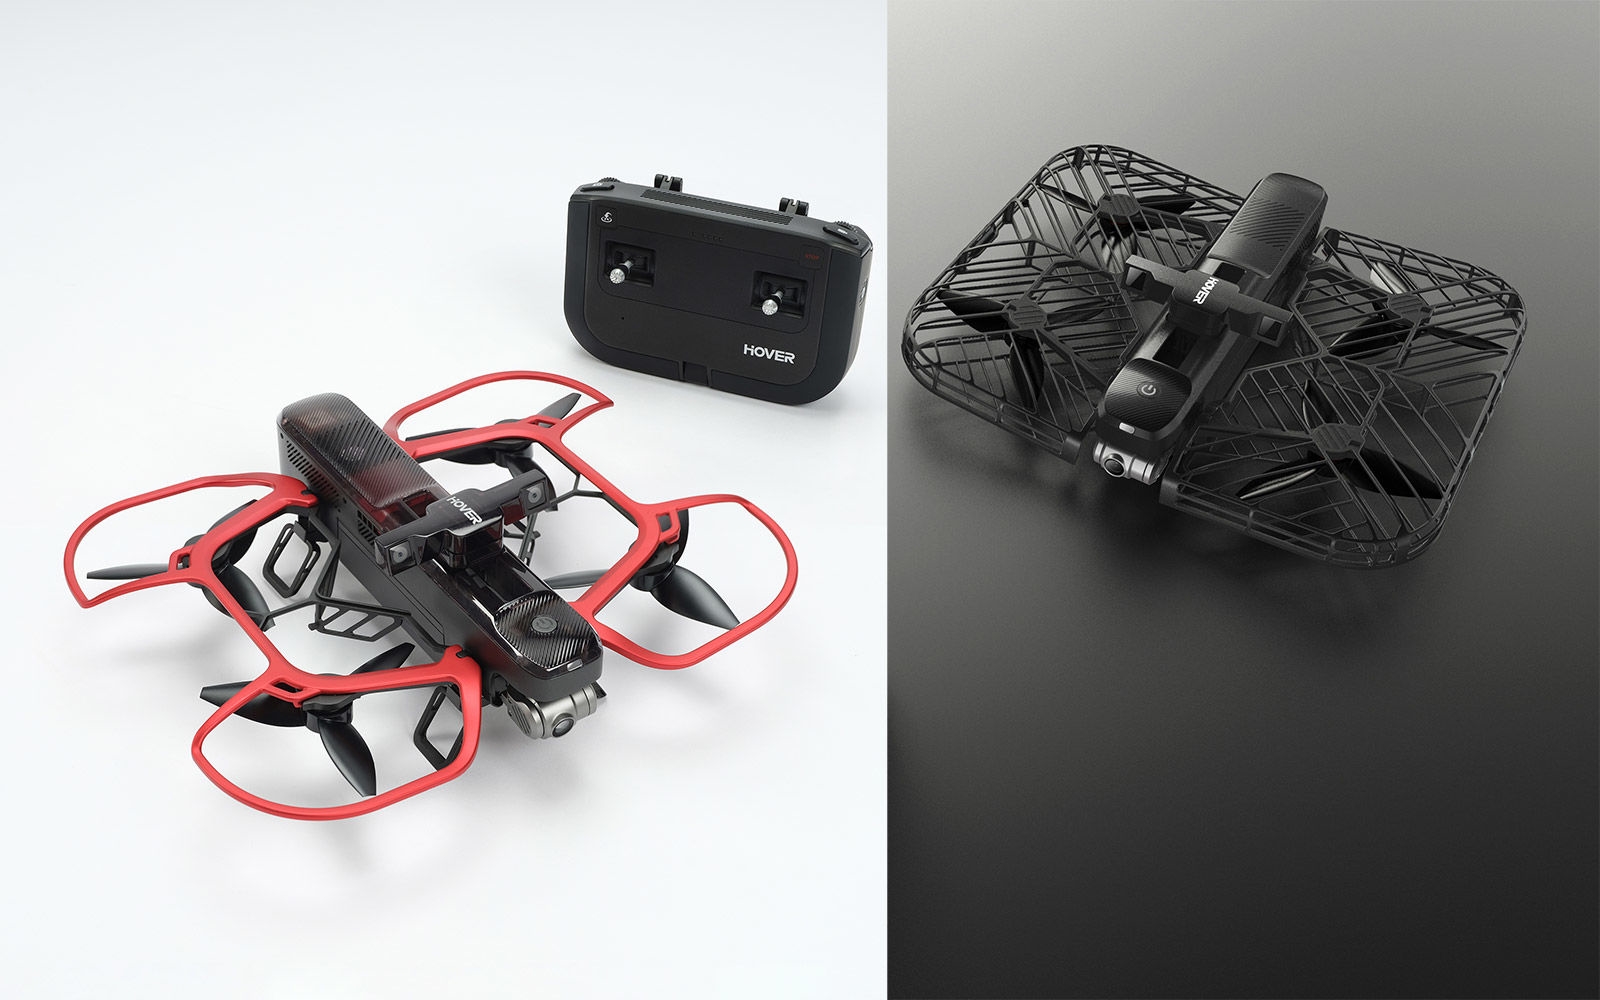 Hover 2 foldable drone can look for obstacles as it flies itself | DeviceDaily.com